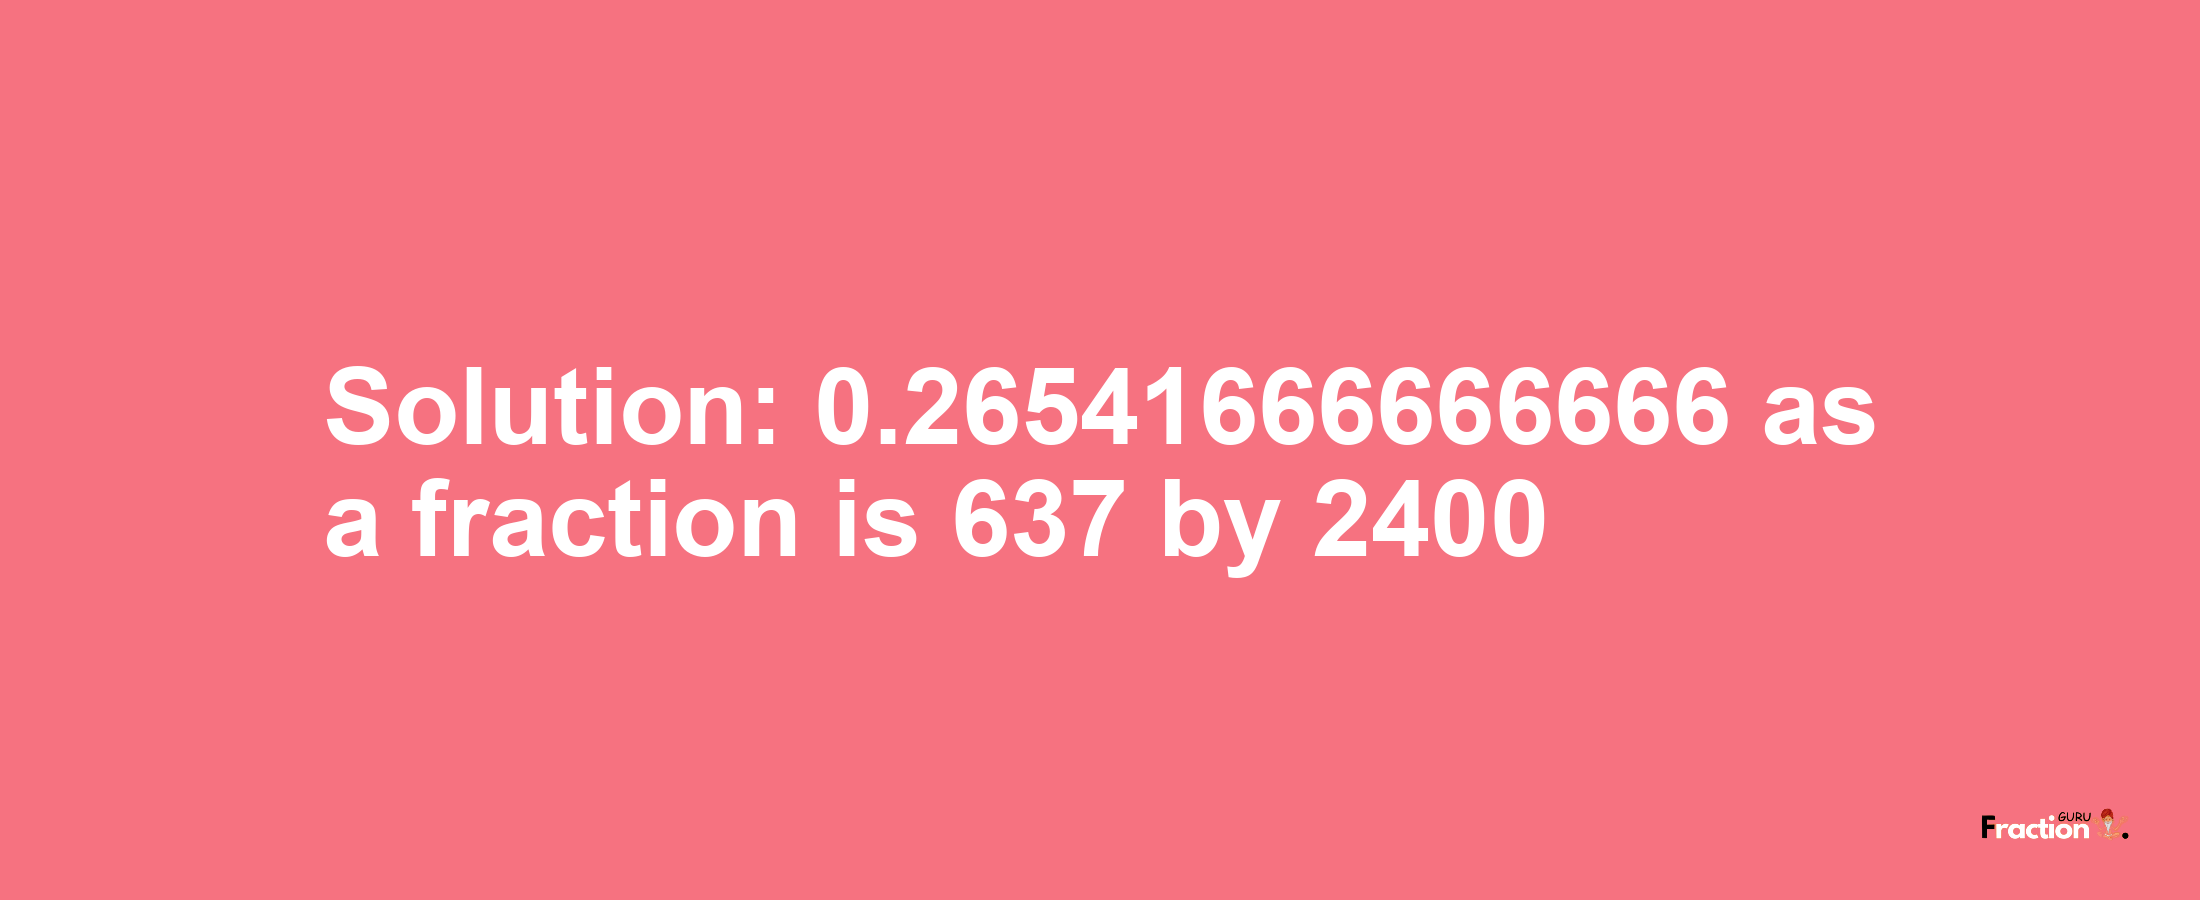 Solution:0.26541666666666 as a fraction is 637/2400